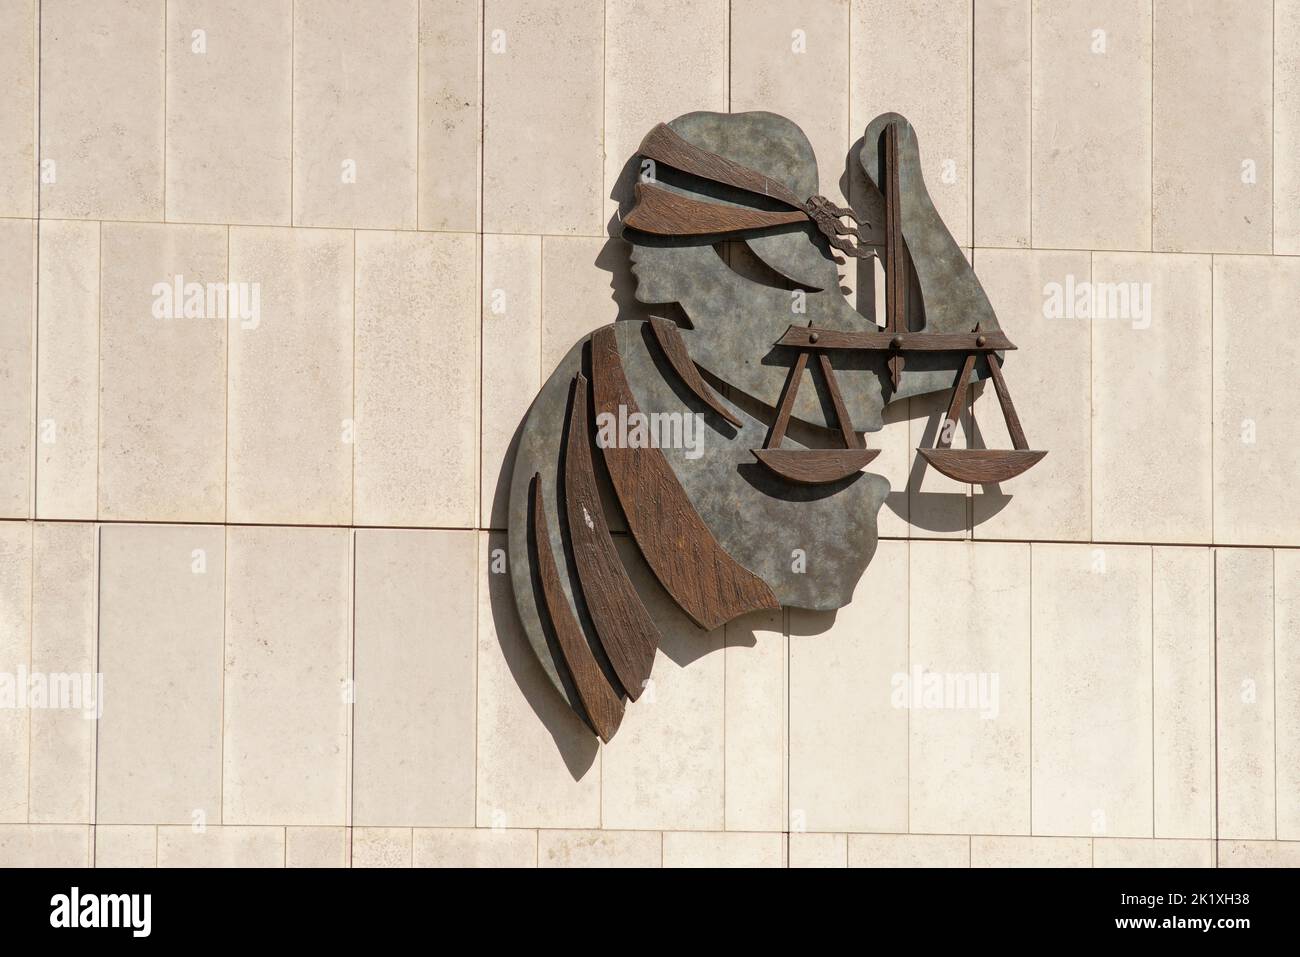 The Criminal Courts of Justice symbol, Dublin in Ireland. Stock Photo